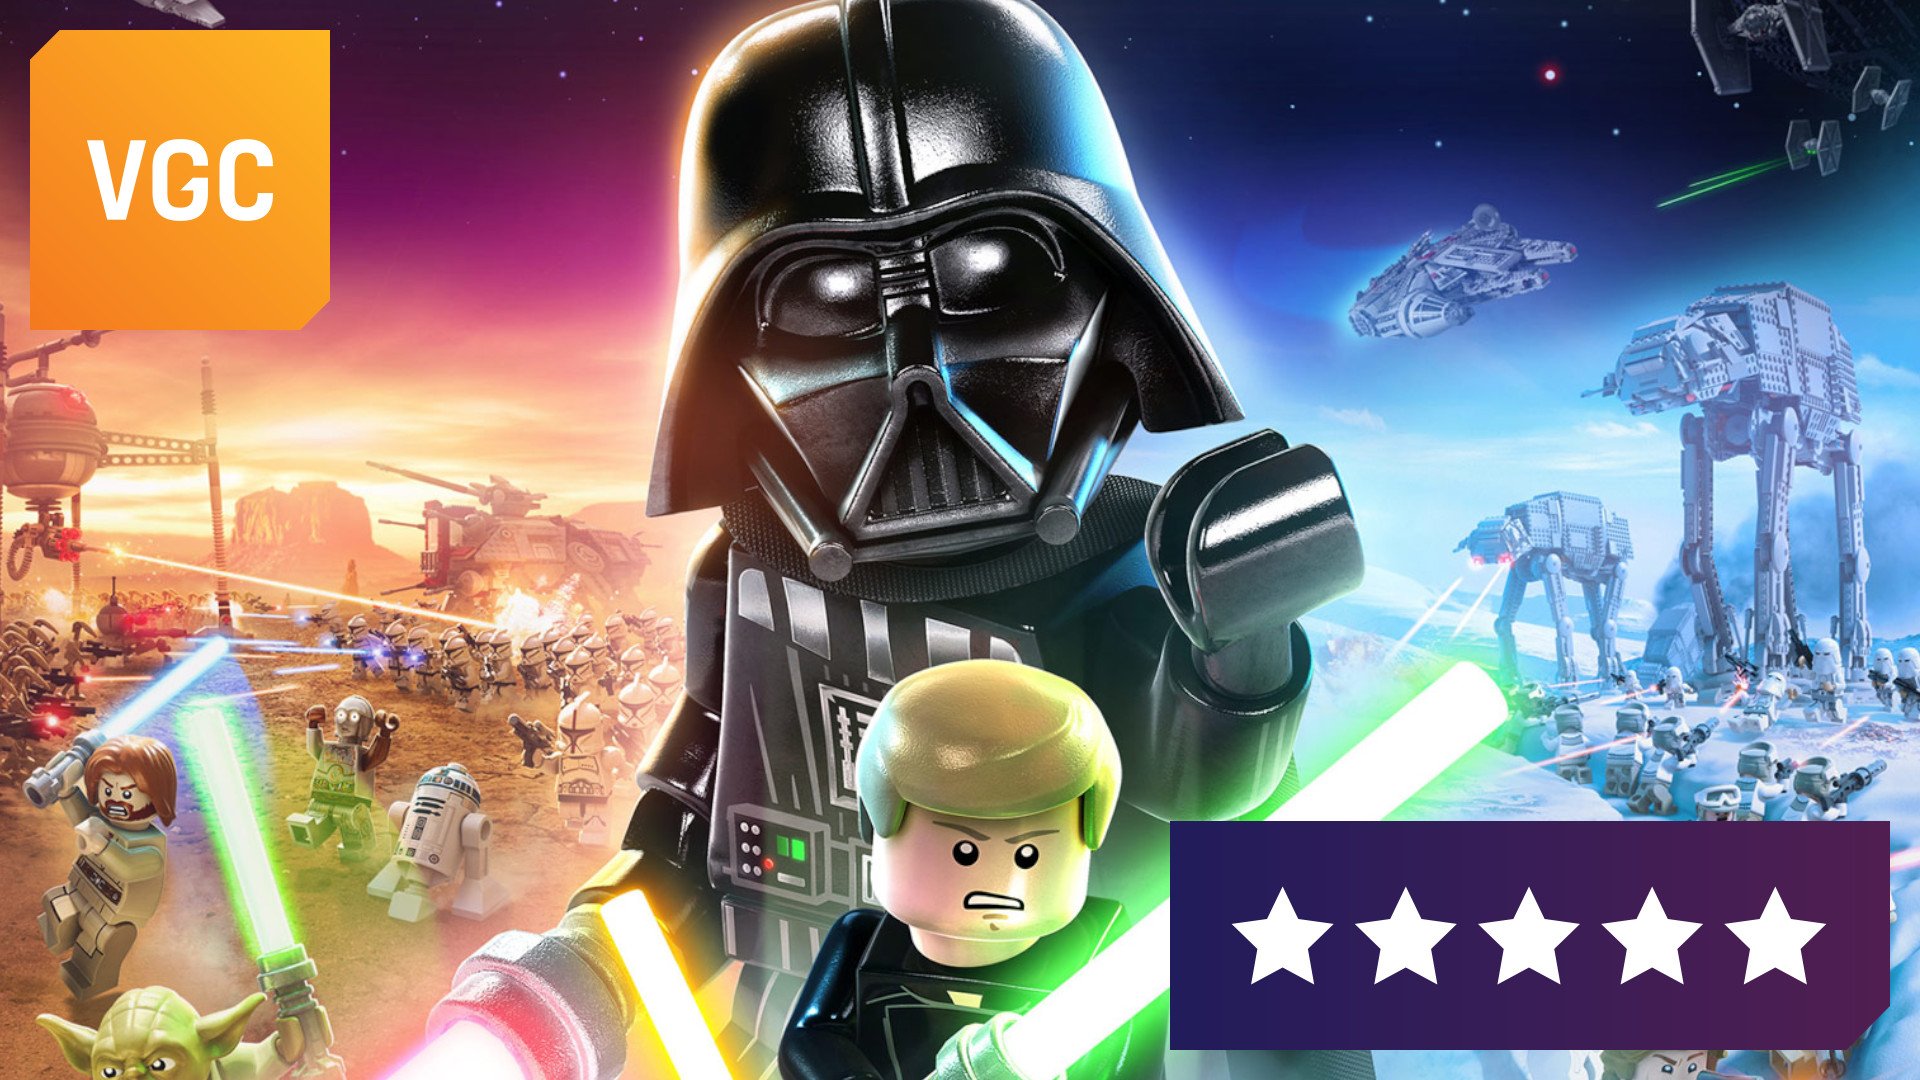 Review: Lego Star - The Saga is one of the best Star Wars games